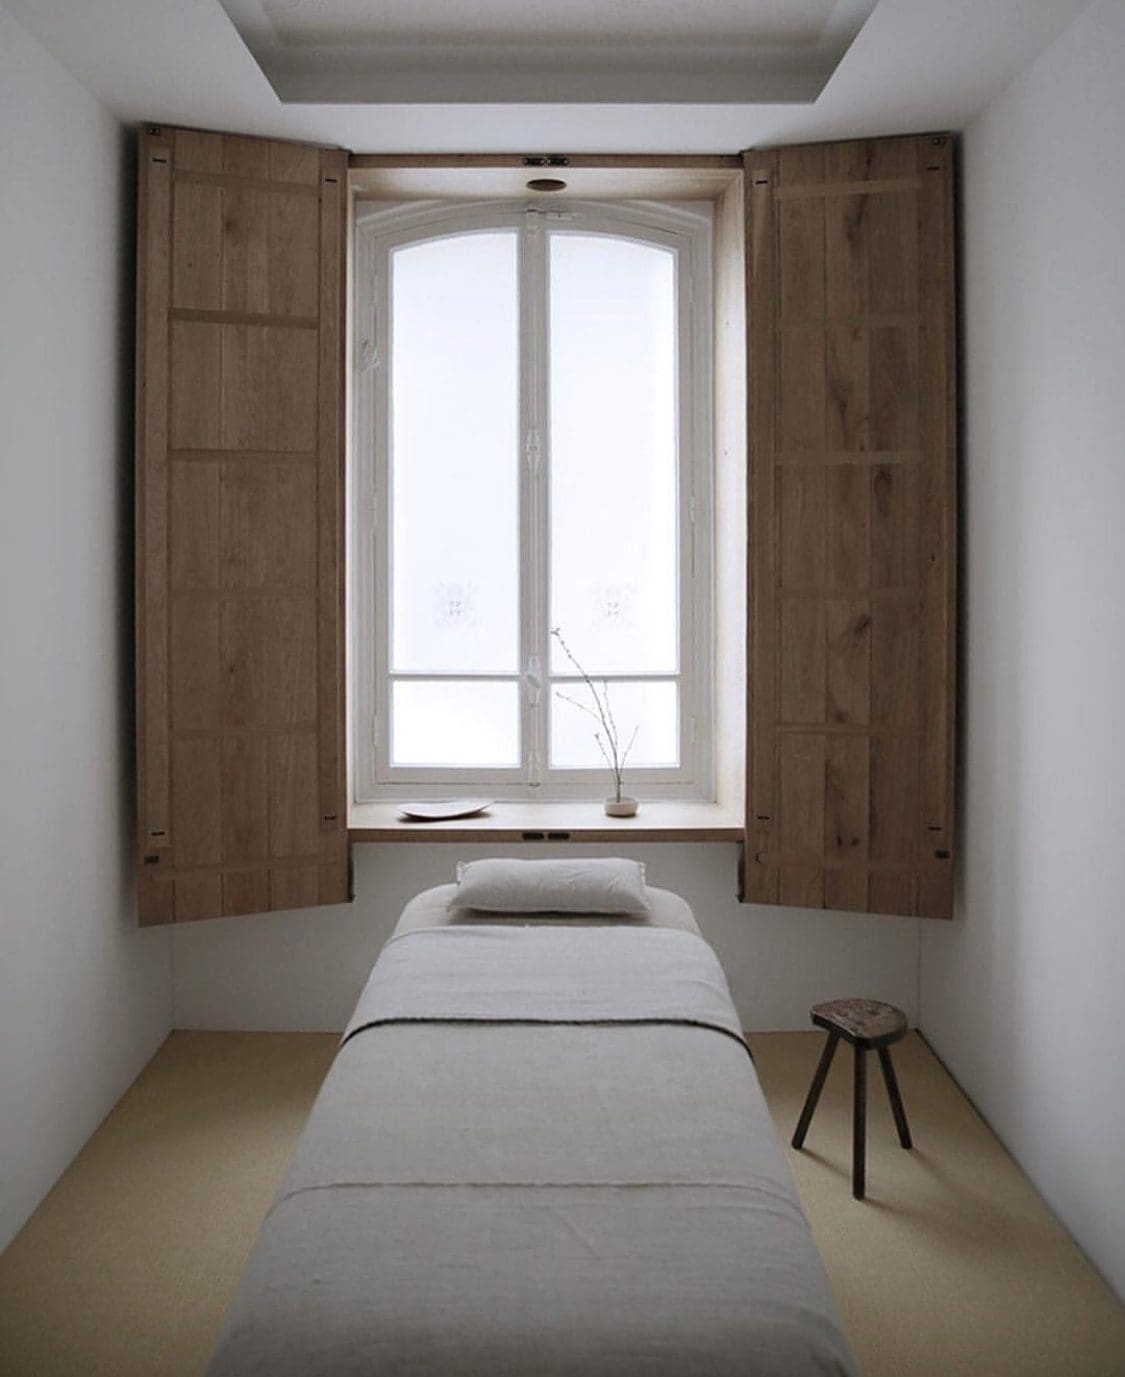 a bed in a room with a window